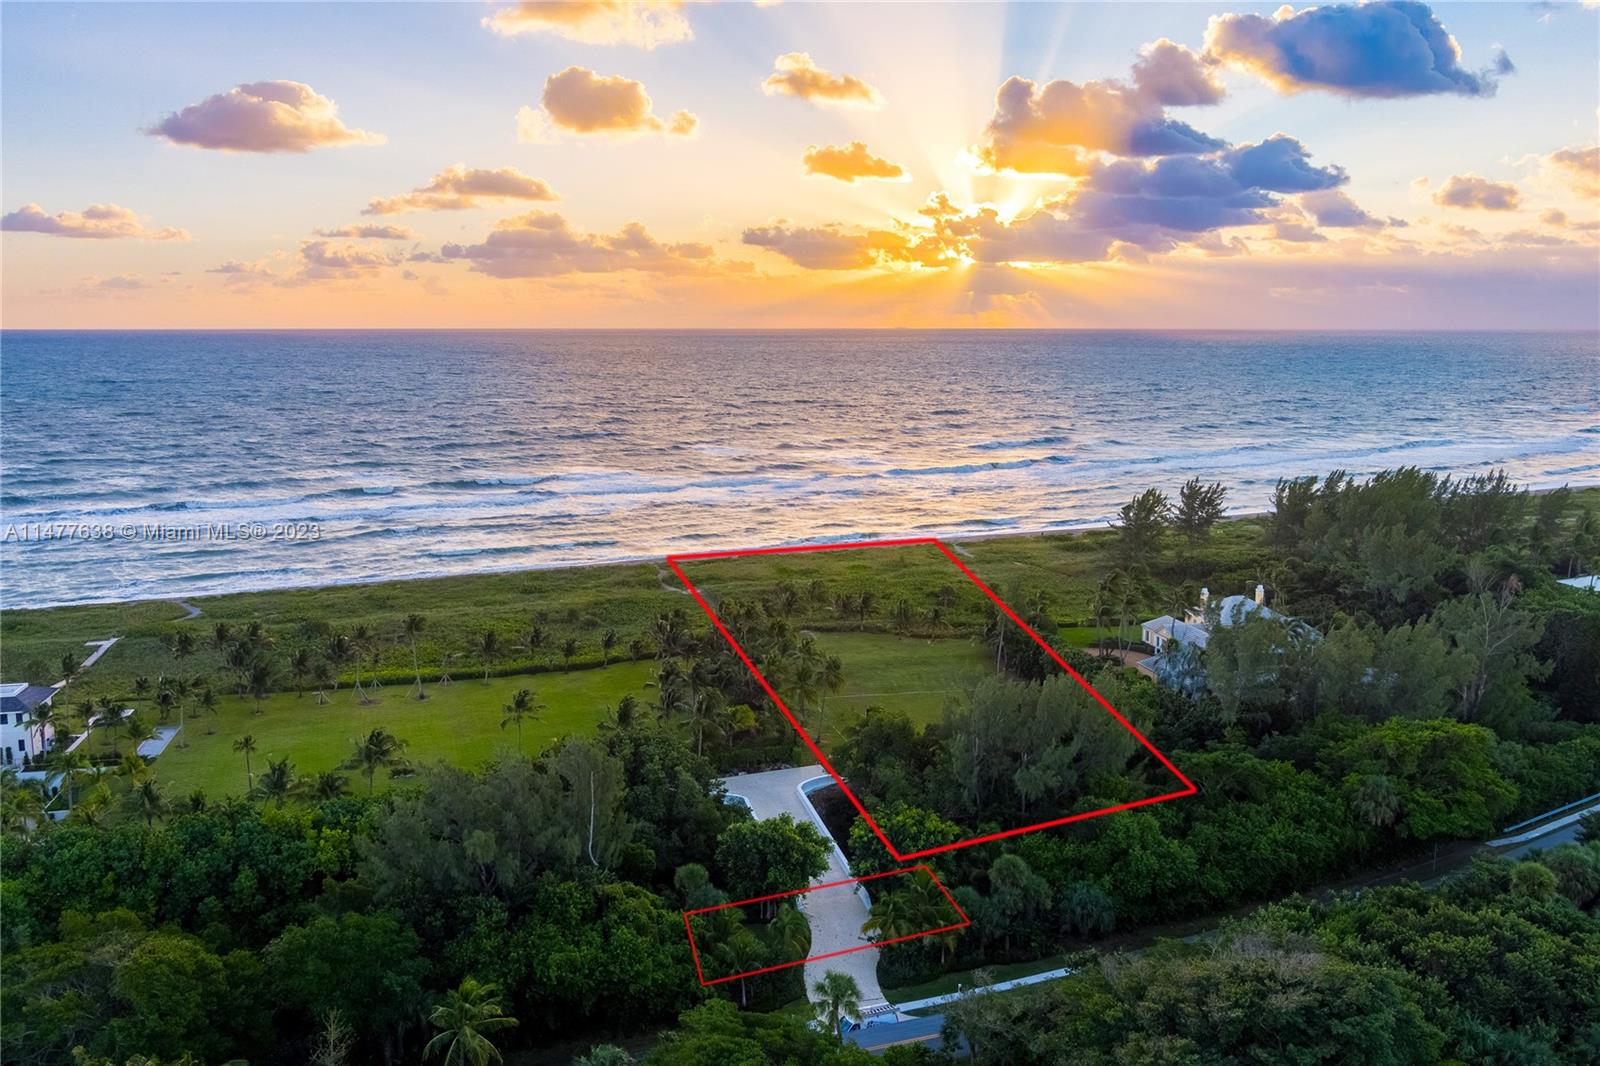 483 S Beach Rd, Jupiter Island, Florida, 33455, United States, ,Residential,For Sale,S Beach Rd,1426866